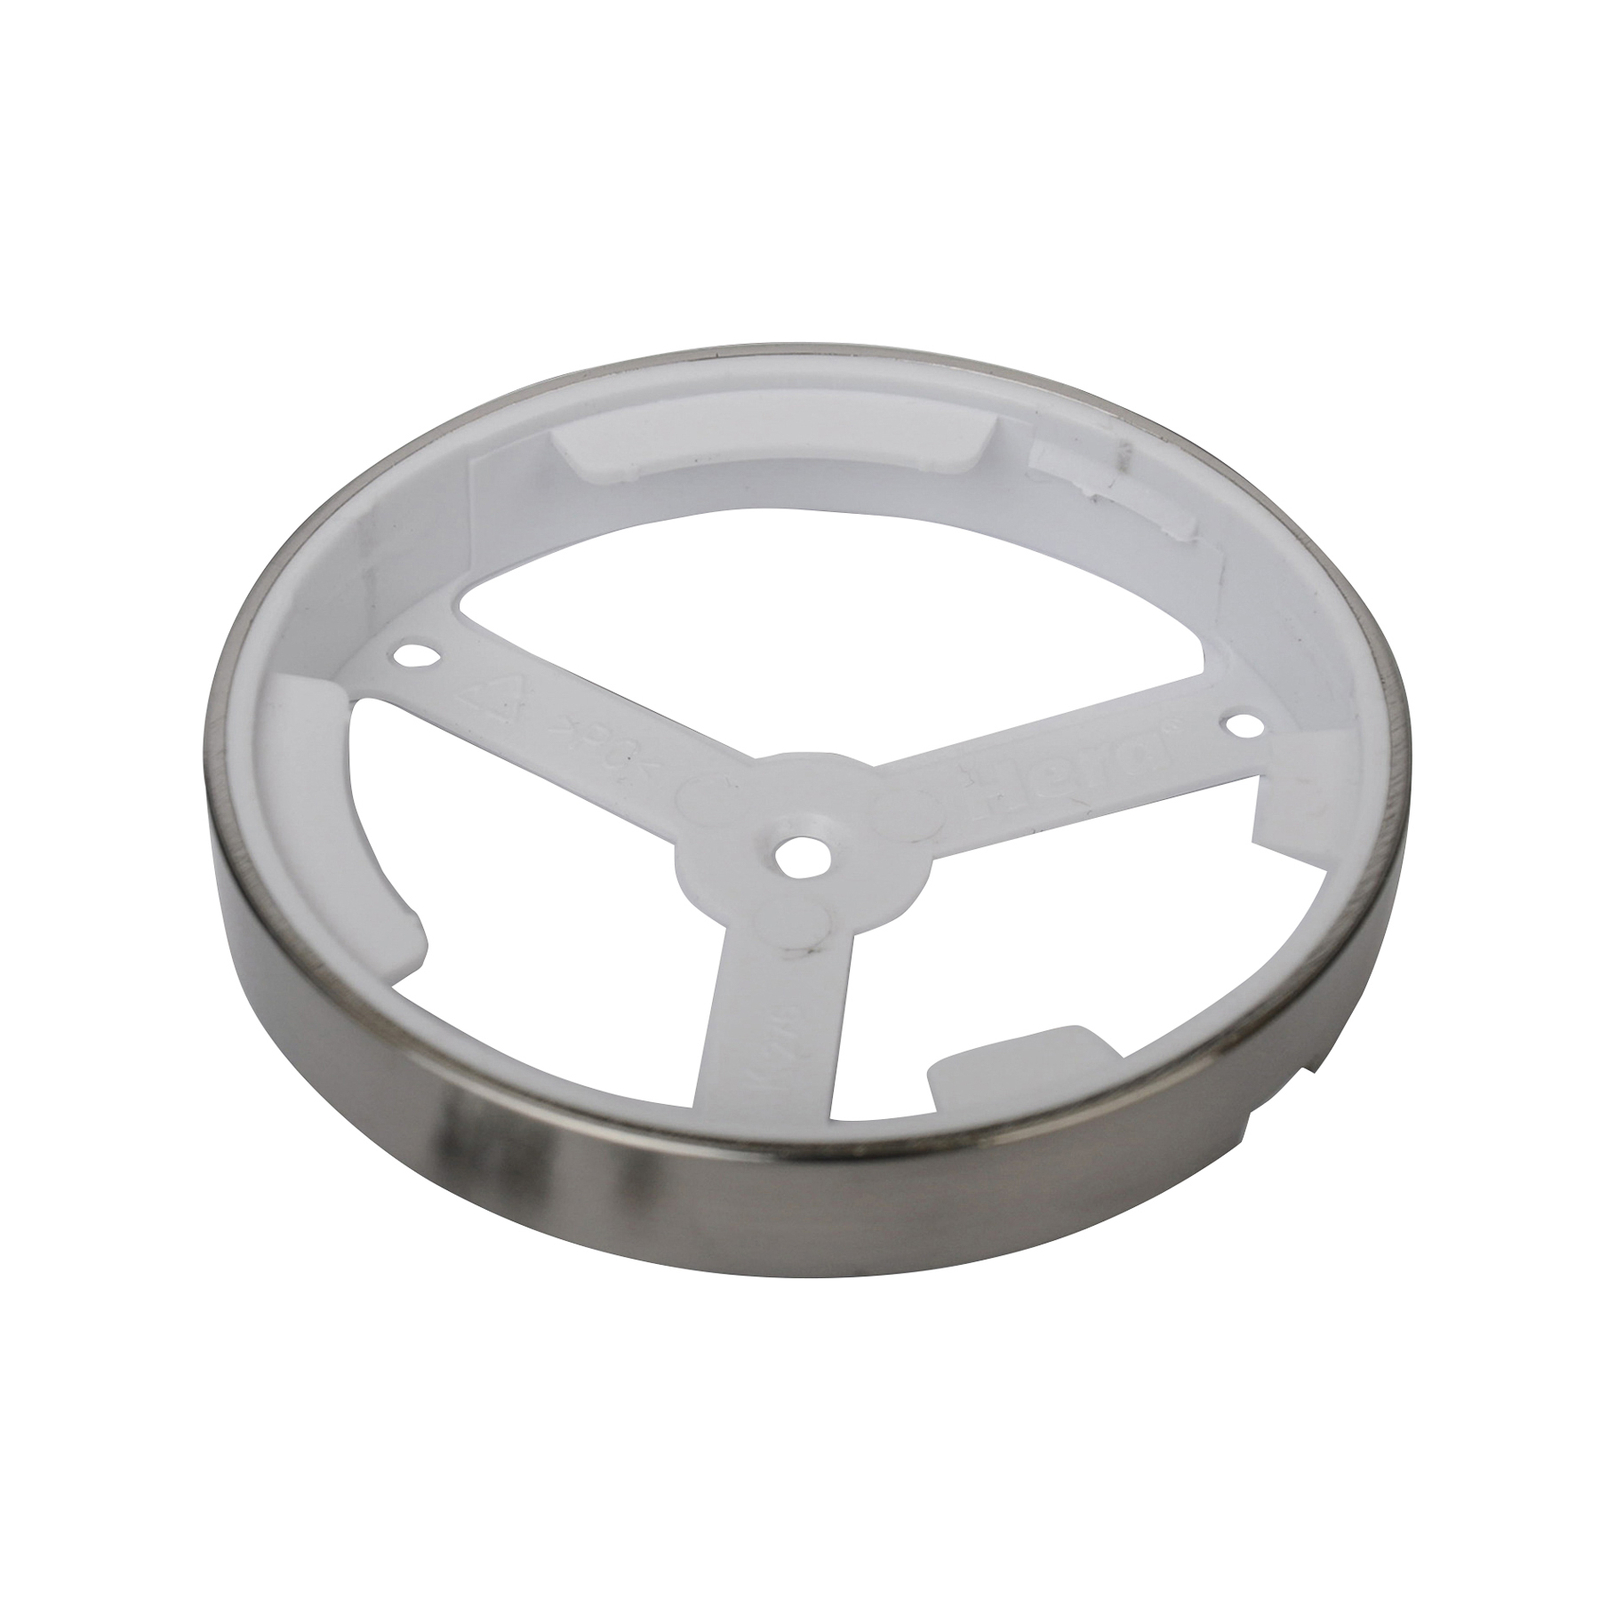 Mounting ring round steel - FAR 68 recessed light